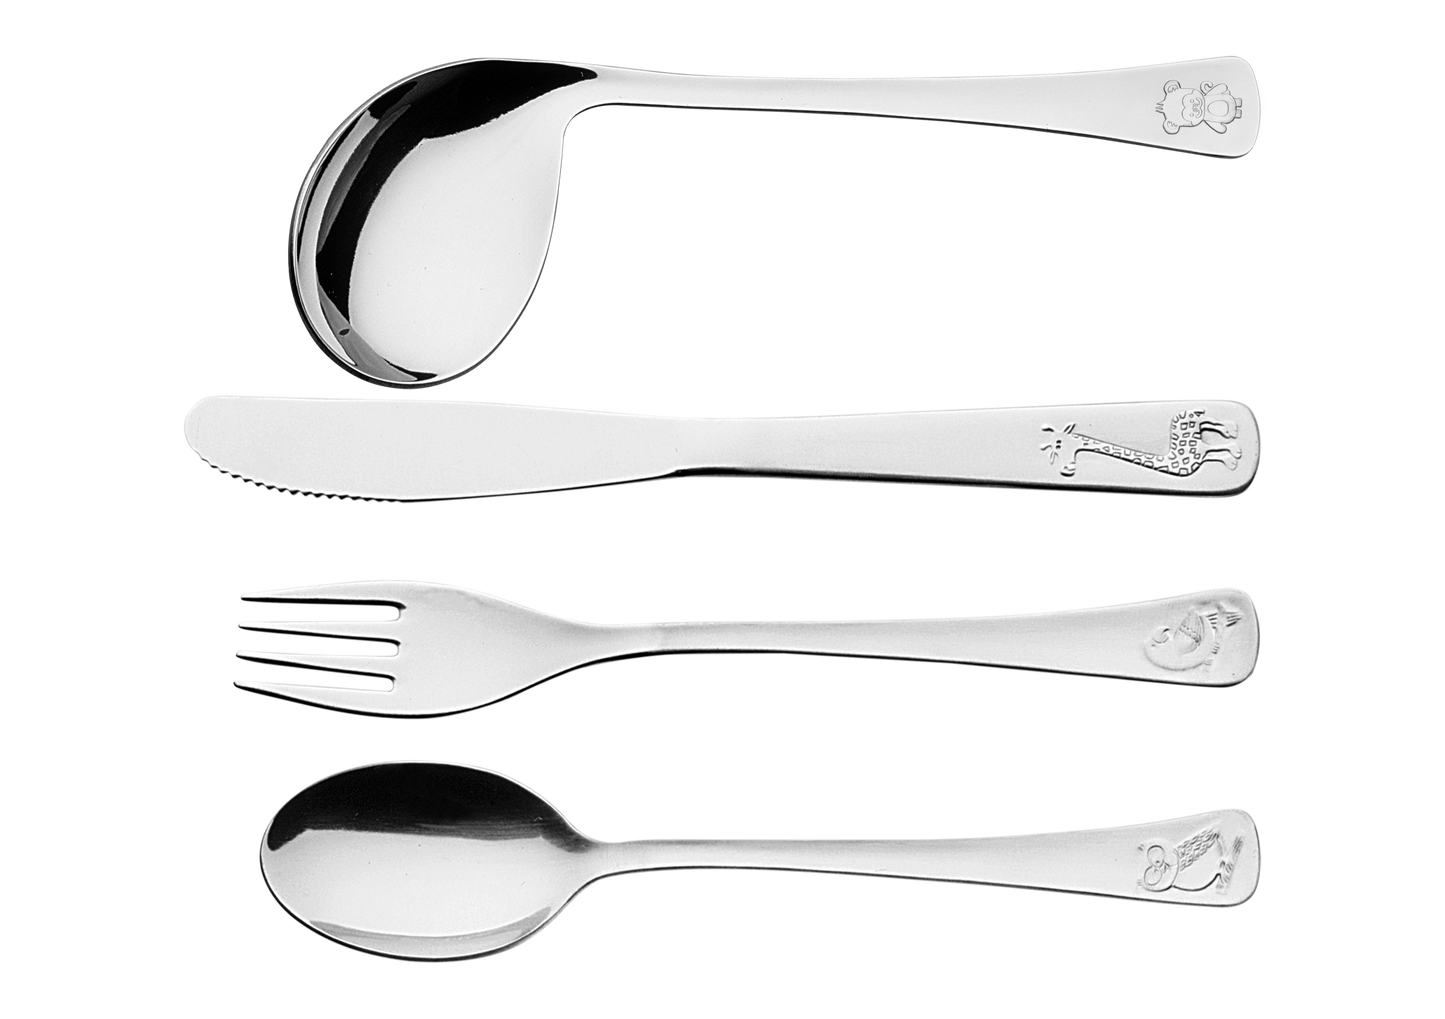 4pc. Child's Set, Stainless Steel. Knife, Fork, Spoon, Curved Spoon